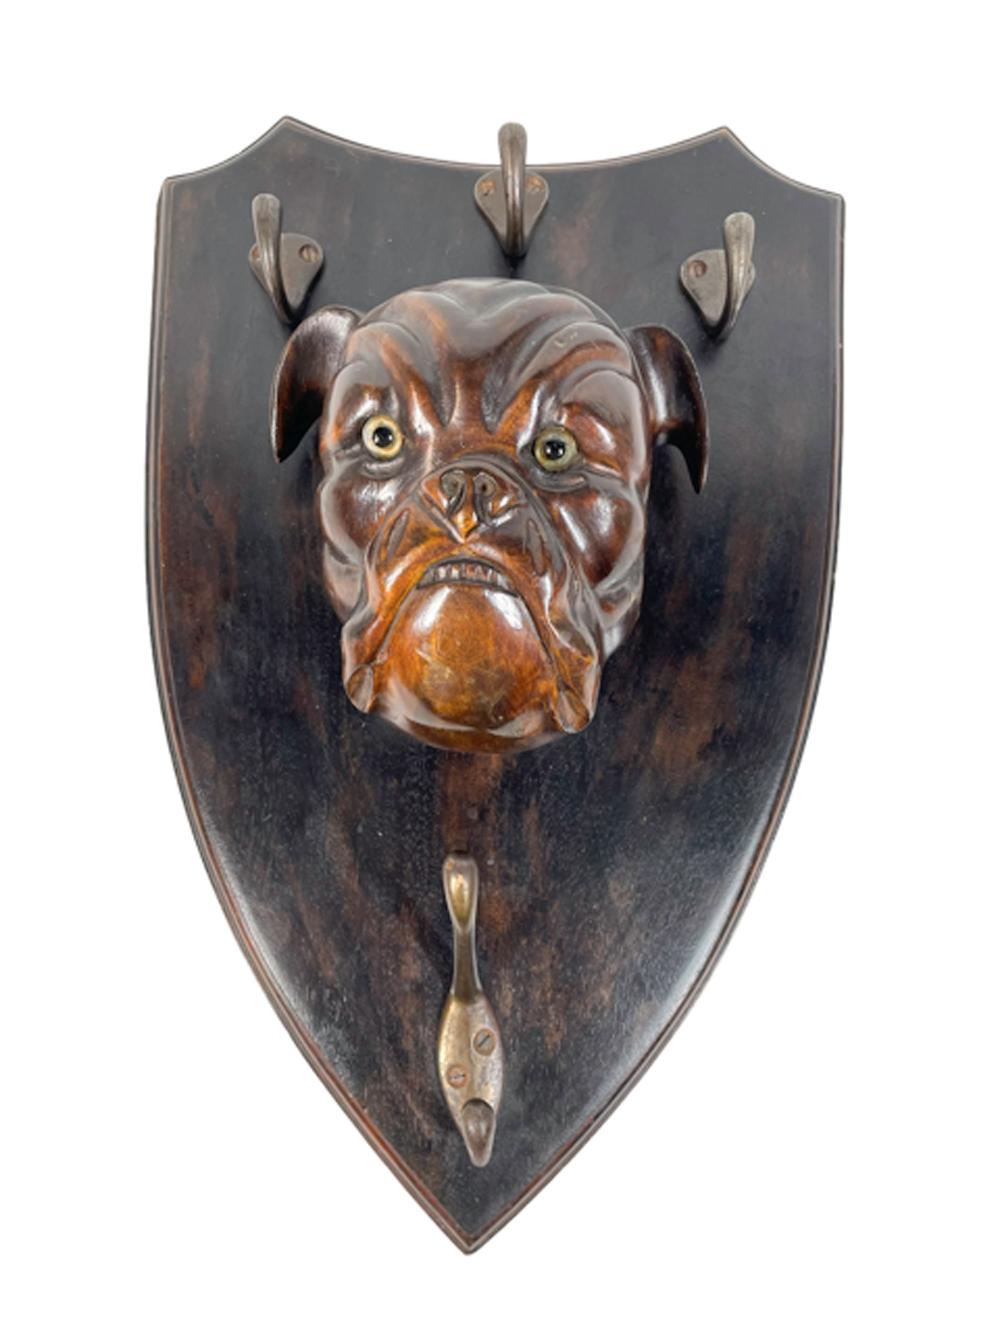 19th Century lead / leash hanger of shield form having a carved wood bulldog head with glass eyes below 3 single hooks and above a double hook.